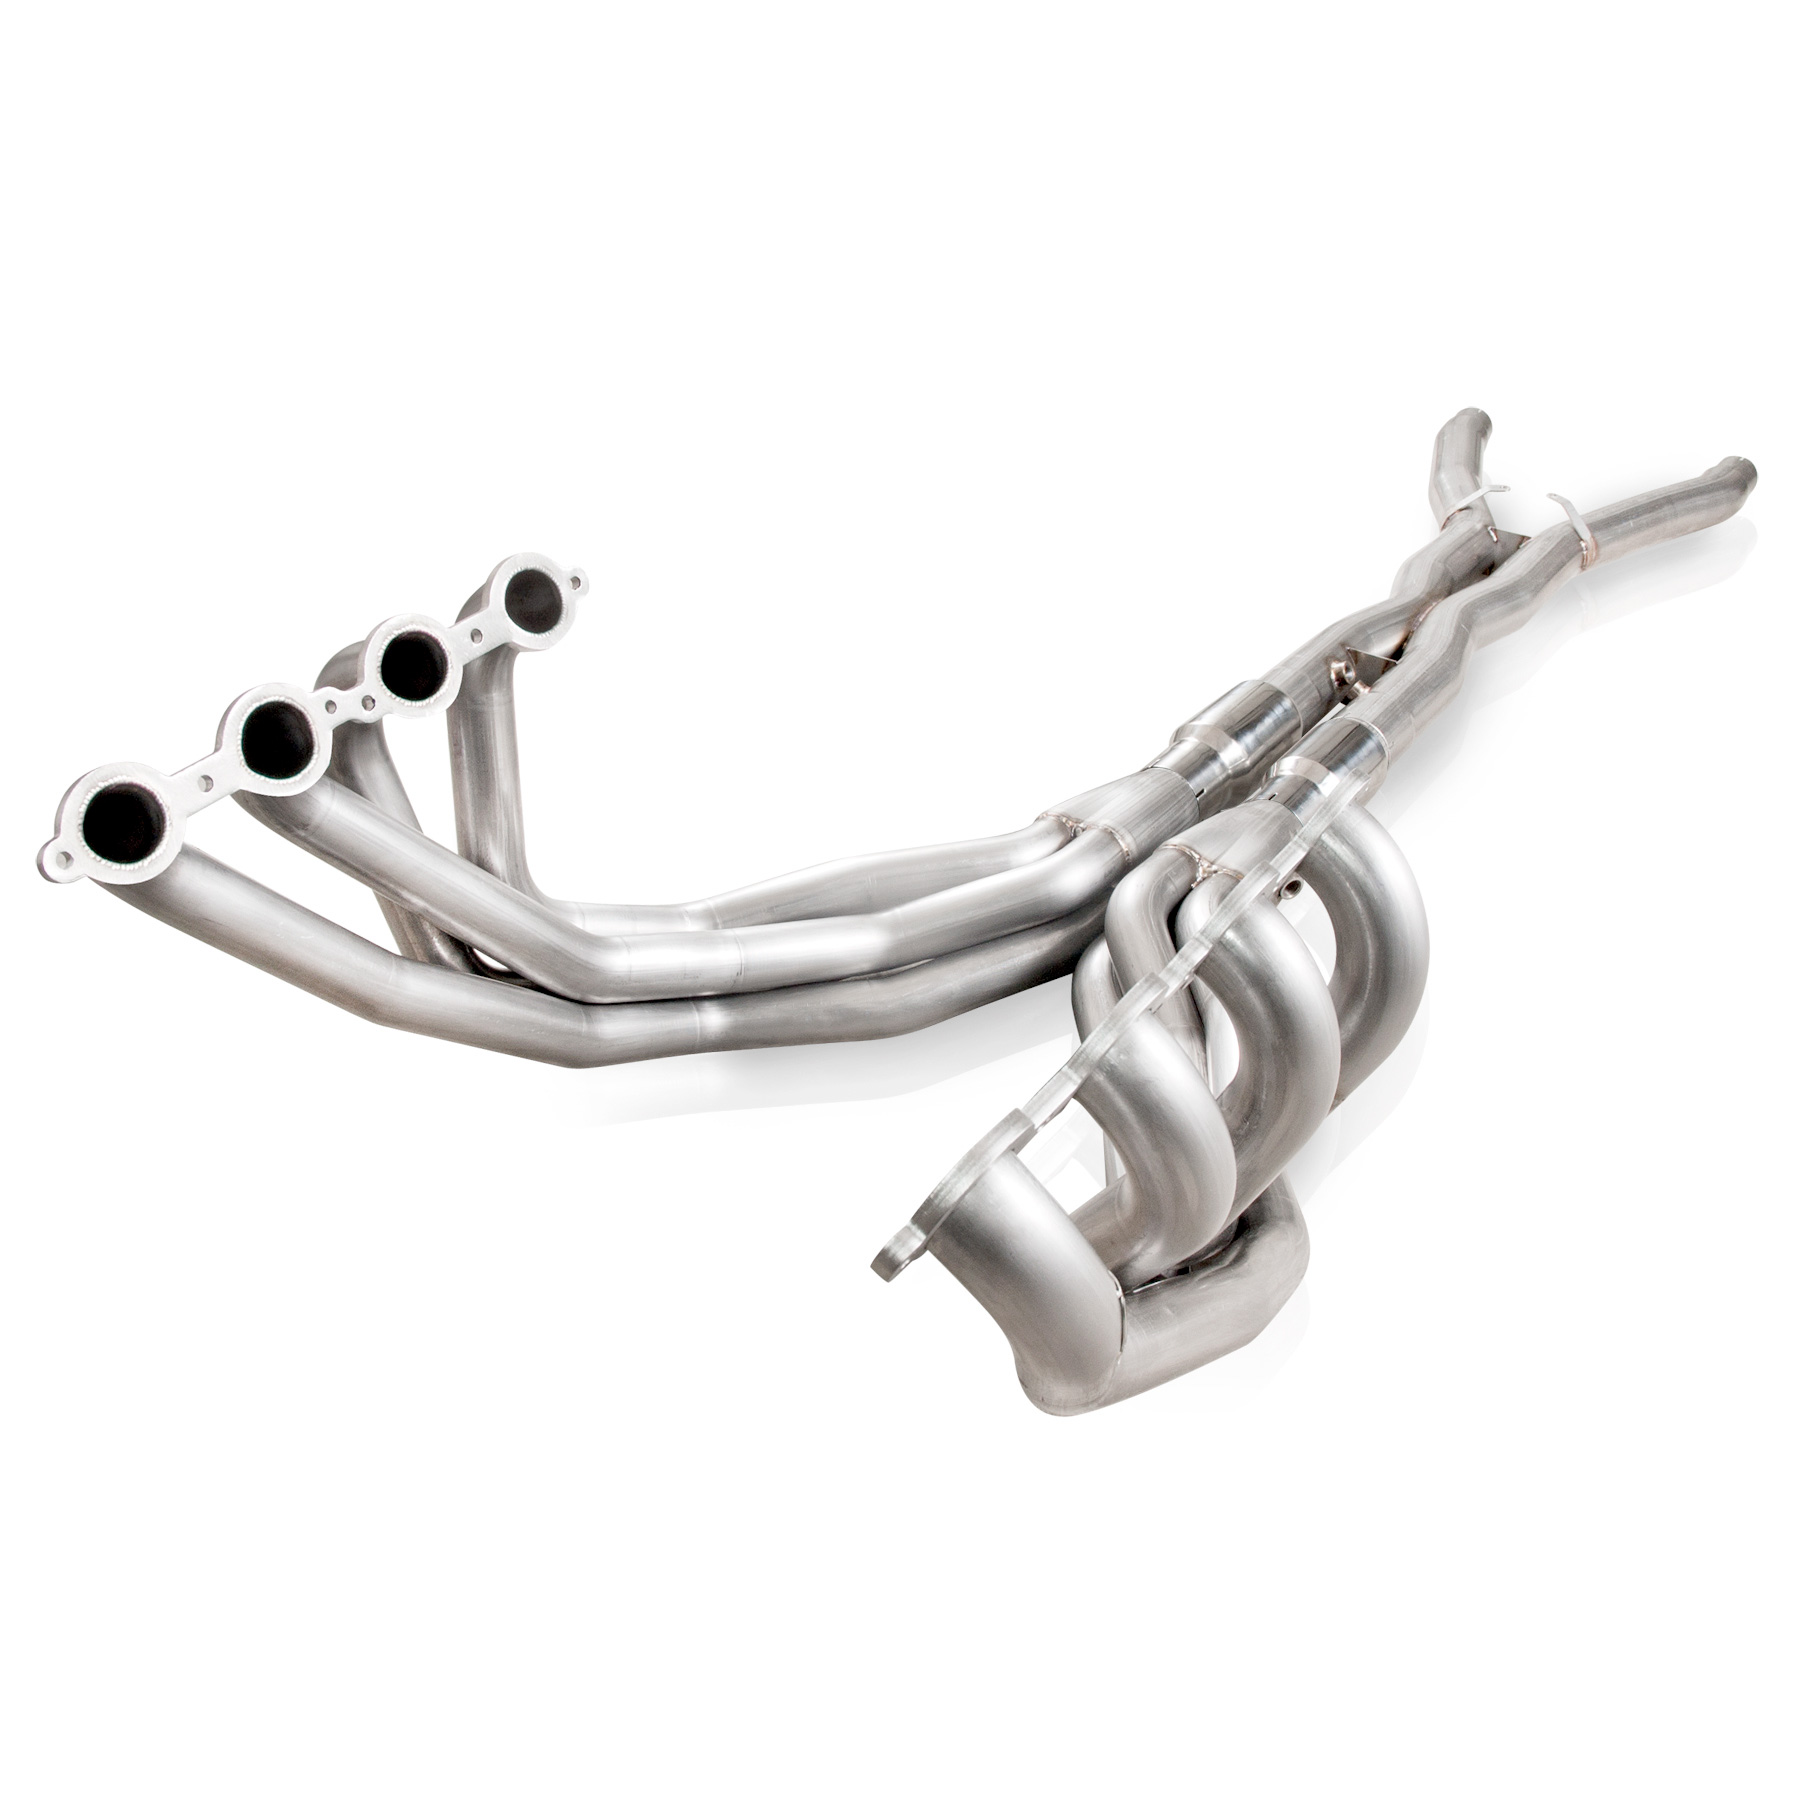 2009-2013 Corvette C6 6.2L, 7.0L SW Headers 2" With Catted Leads Factory Connect